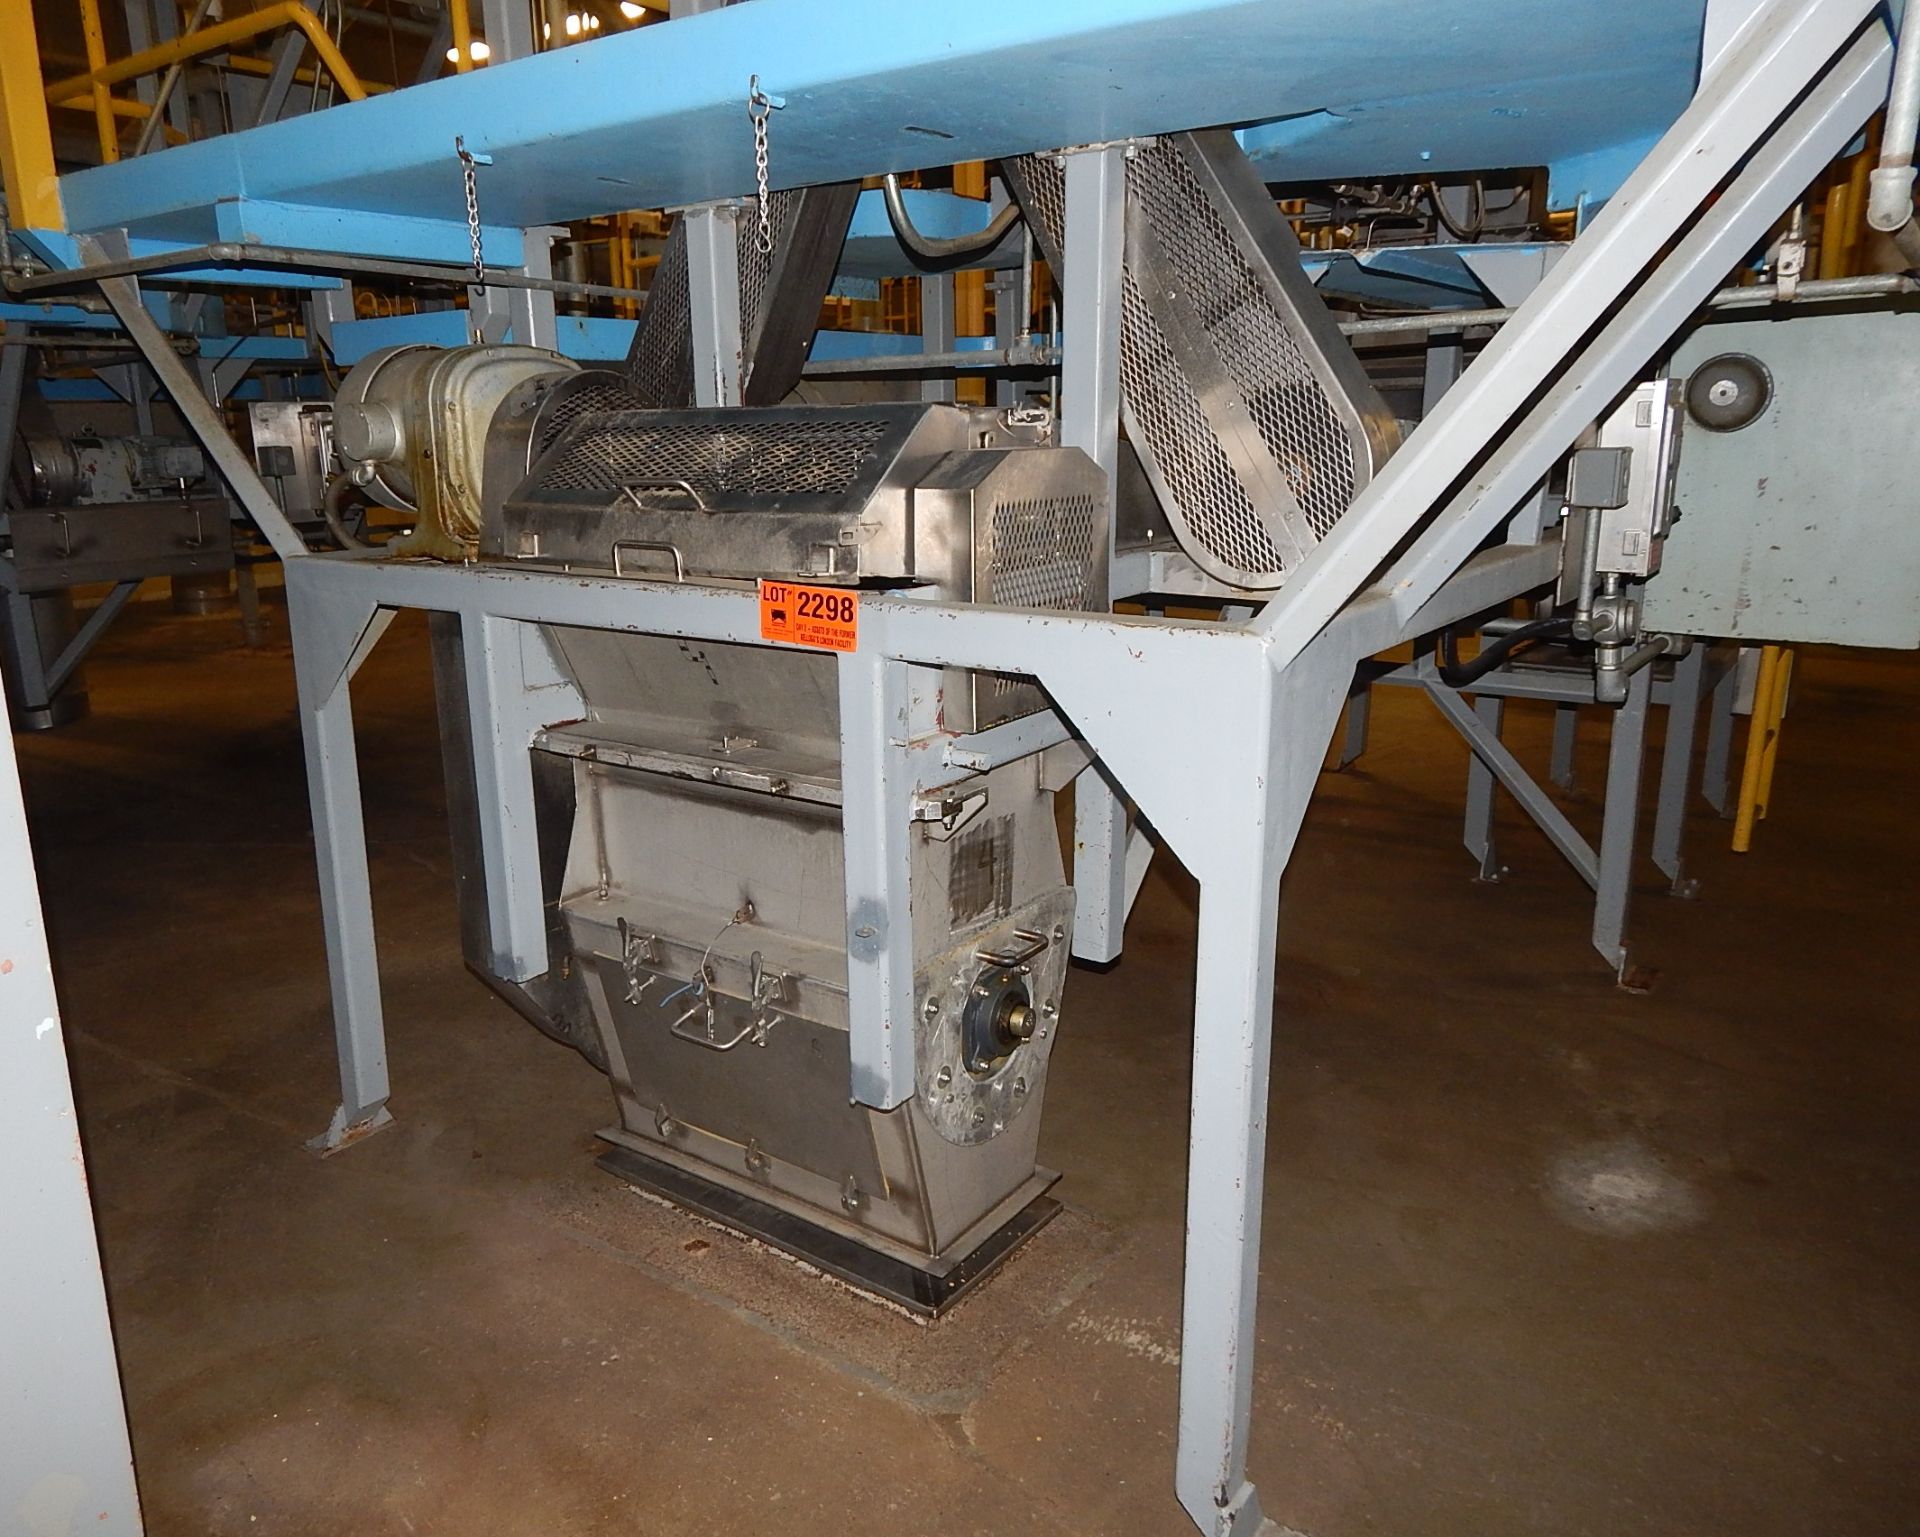 STAINLESS STEEL DOUBLE ROLL RICE PICKER (CI) (BUILDING 26, 3RD FLOOR)